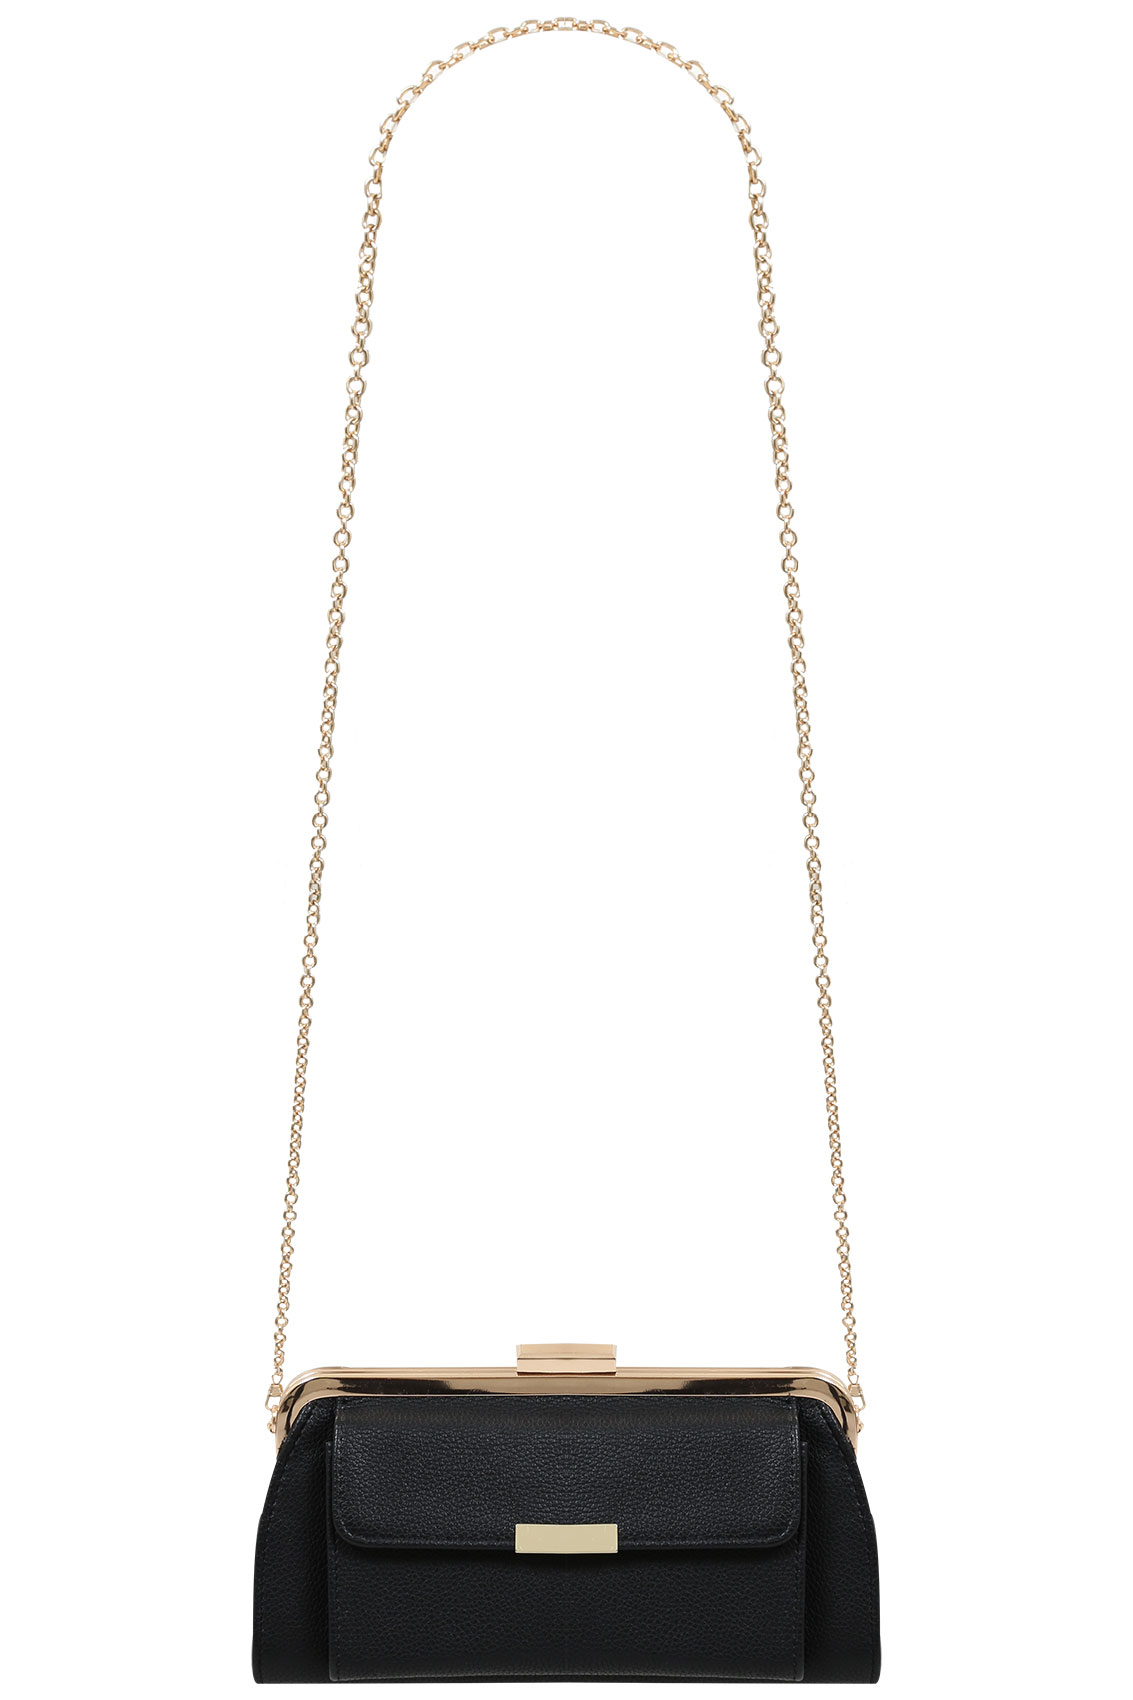 Black Clutch Bag With Gold Chain